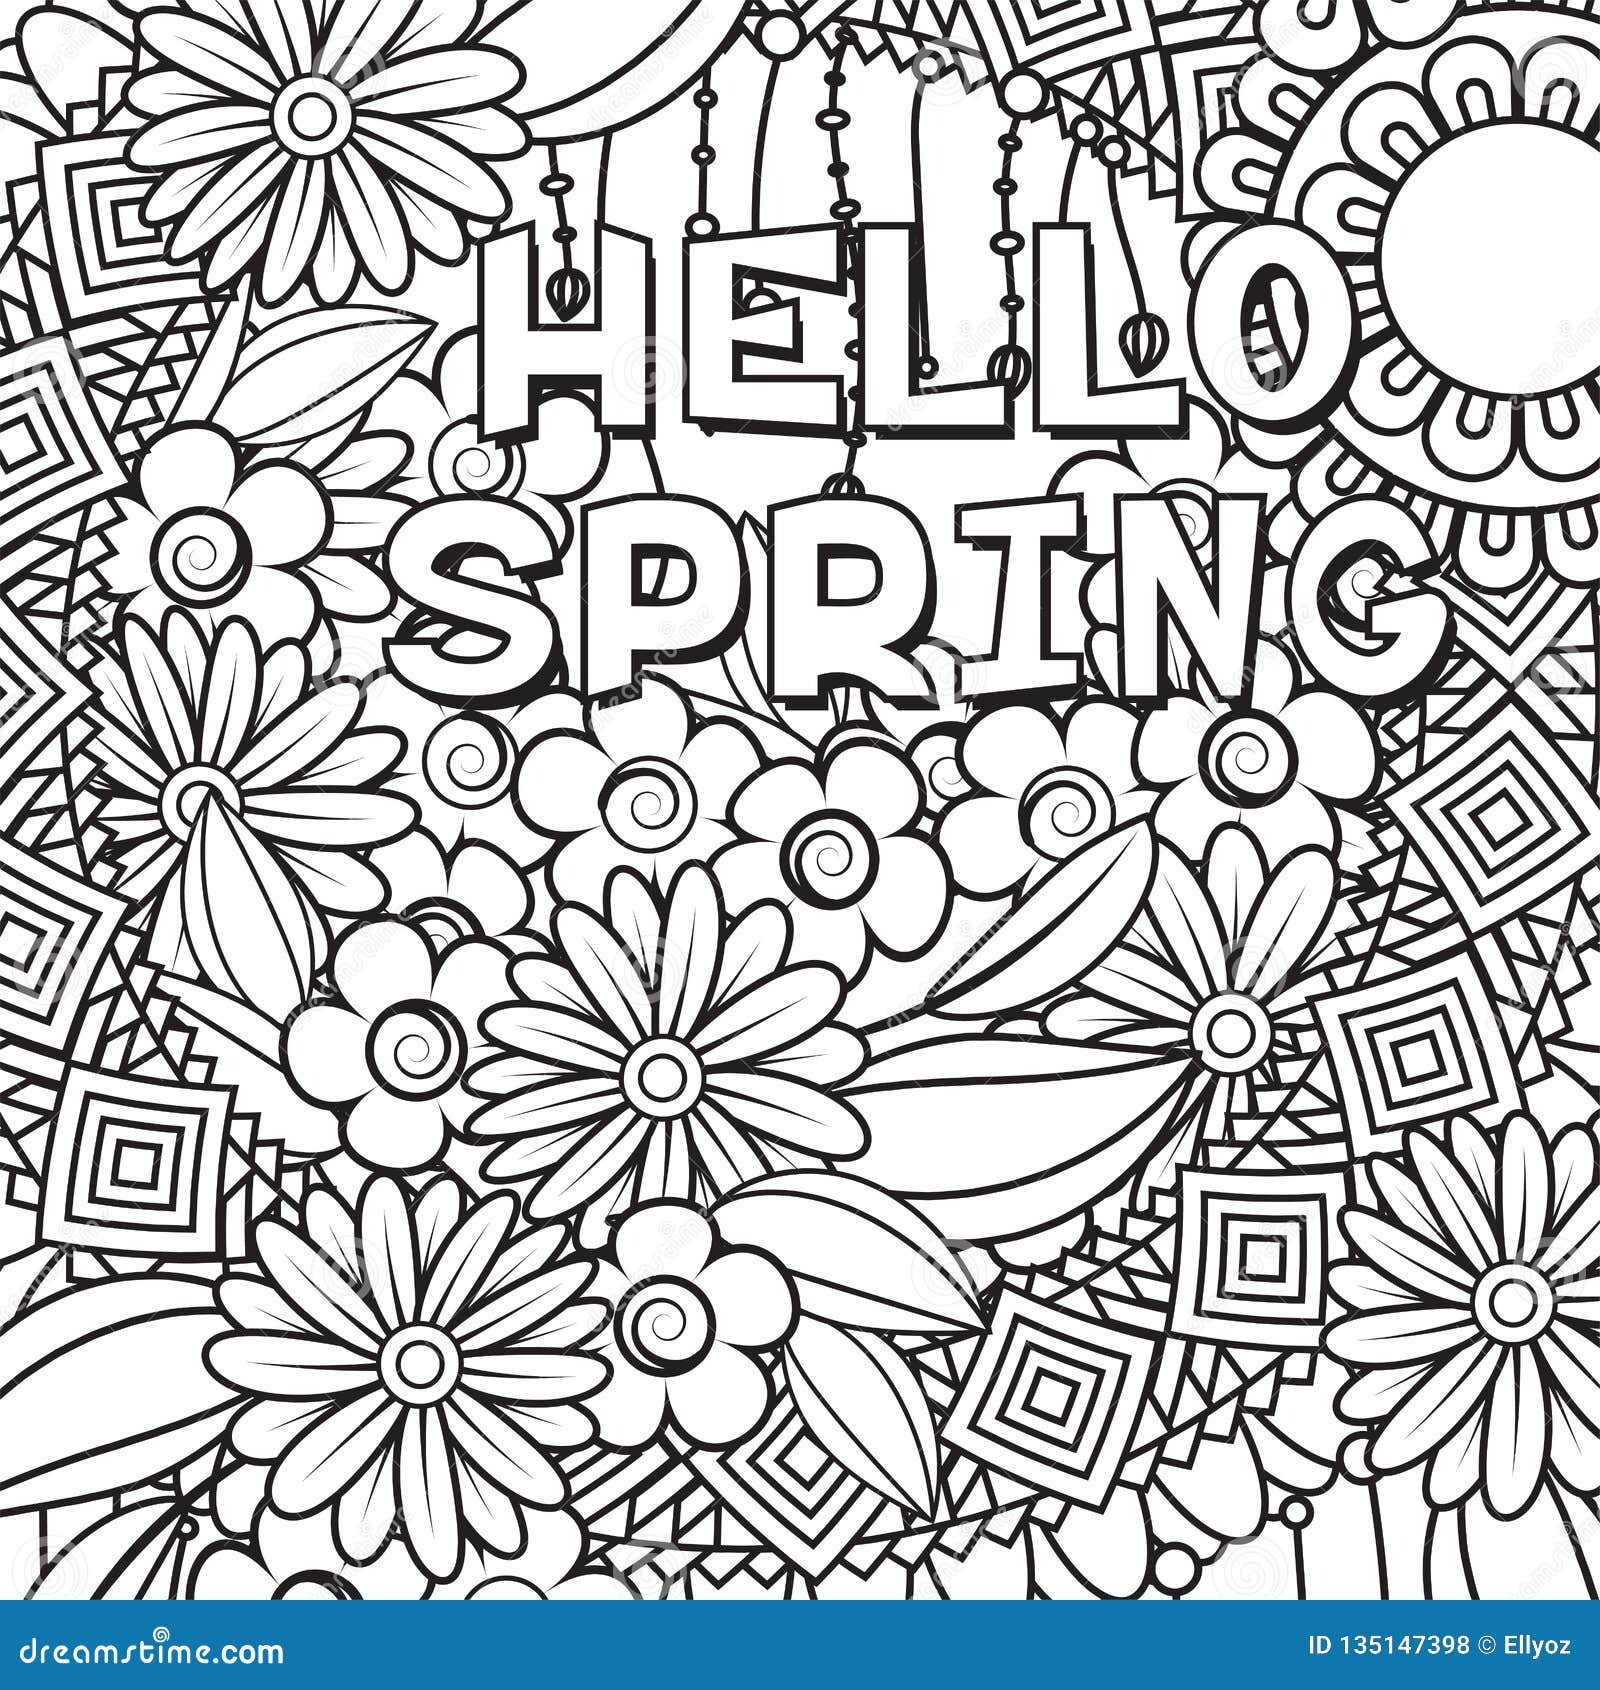 Hello spring coloring page stock vector. Illustration of blooming ...